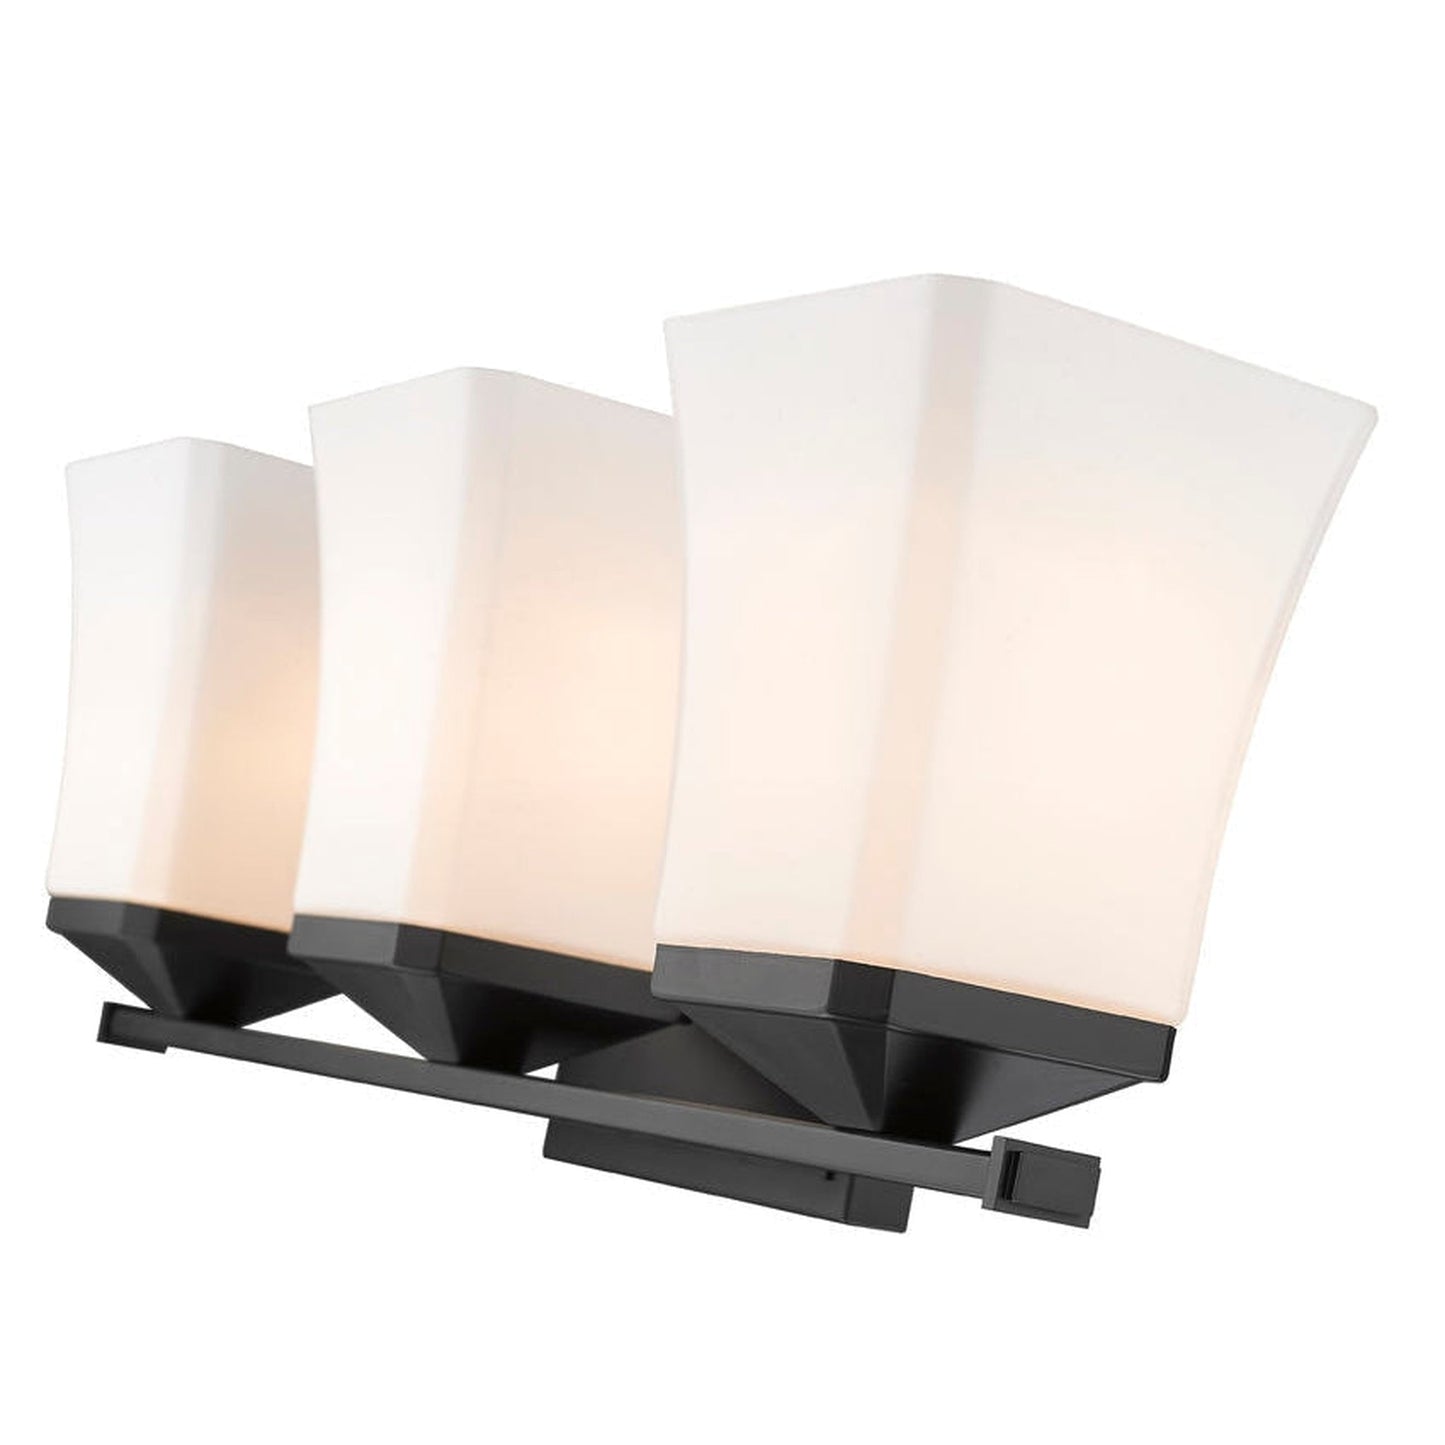 Z-Lite Darcy 22" 3-Light Matte Black Vanity Light With Etched Opal Glass Shade